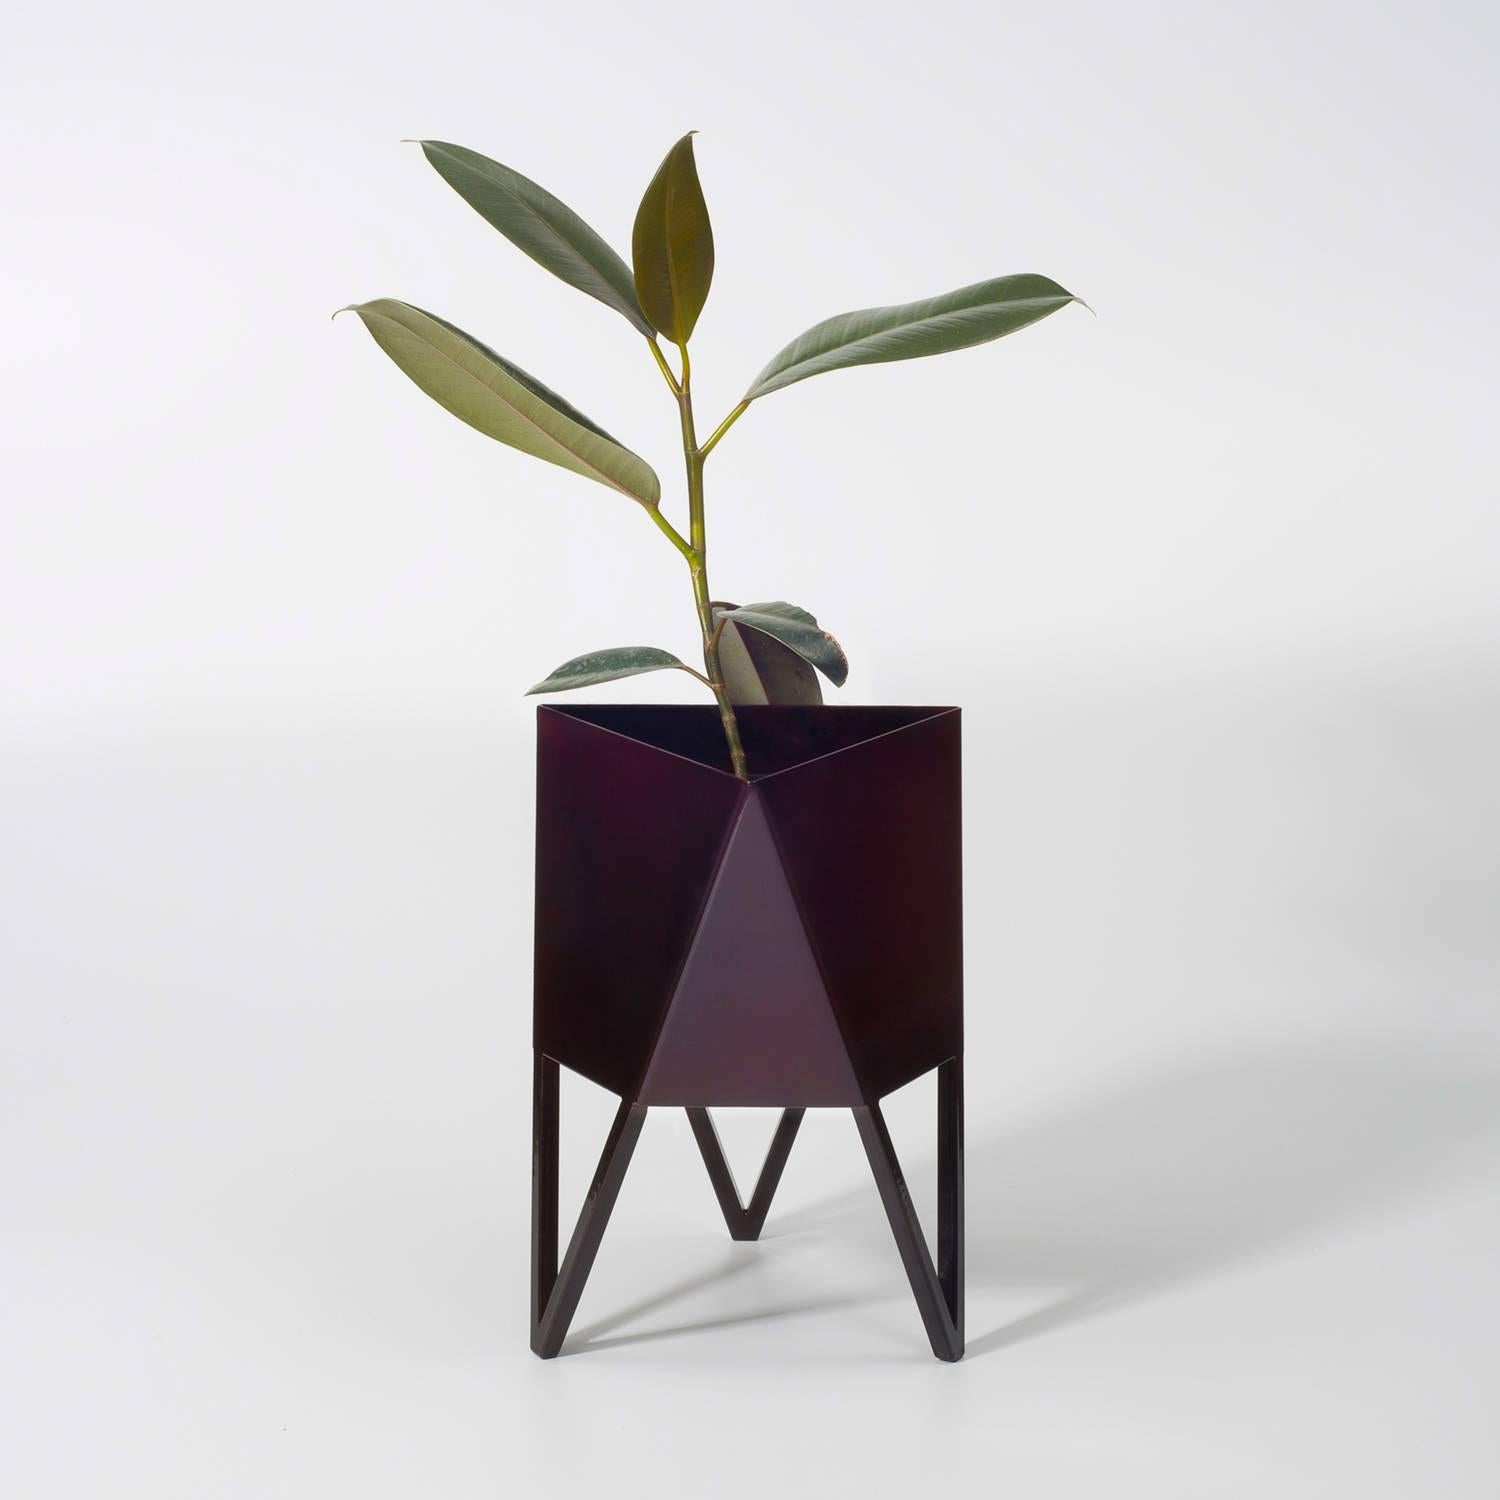 Contemporary Large Deca Planter, Yellow, Steel, Powder Coated, Indoor/Outdoor, Force/Collide